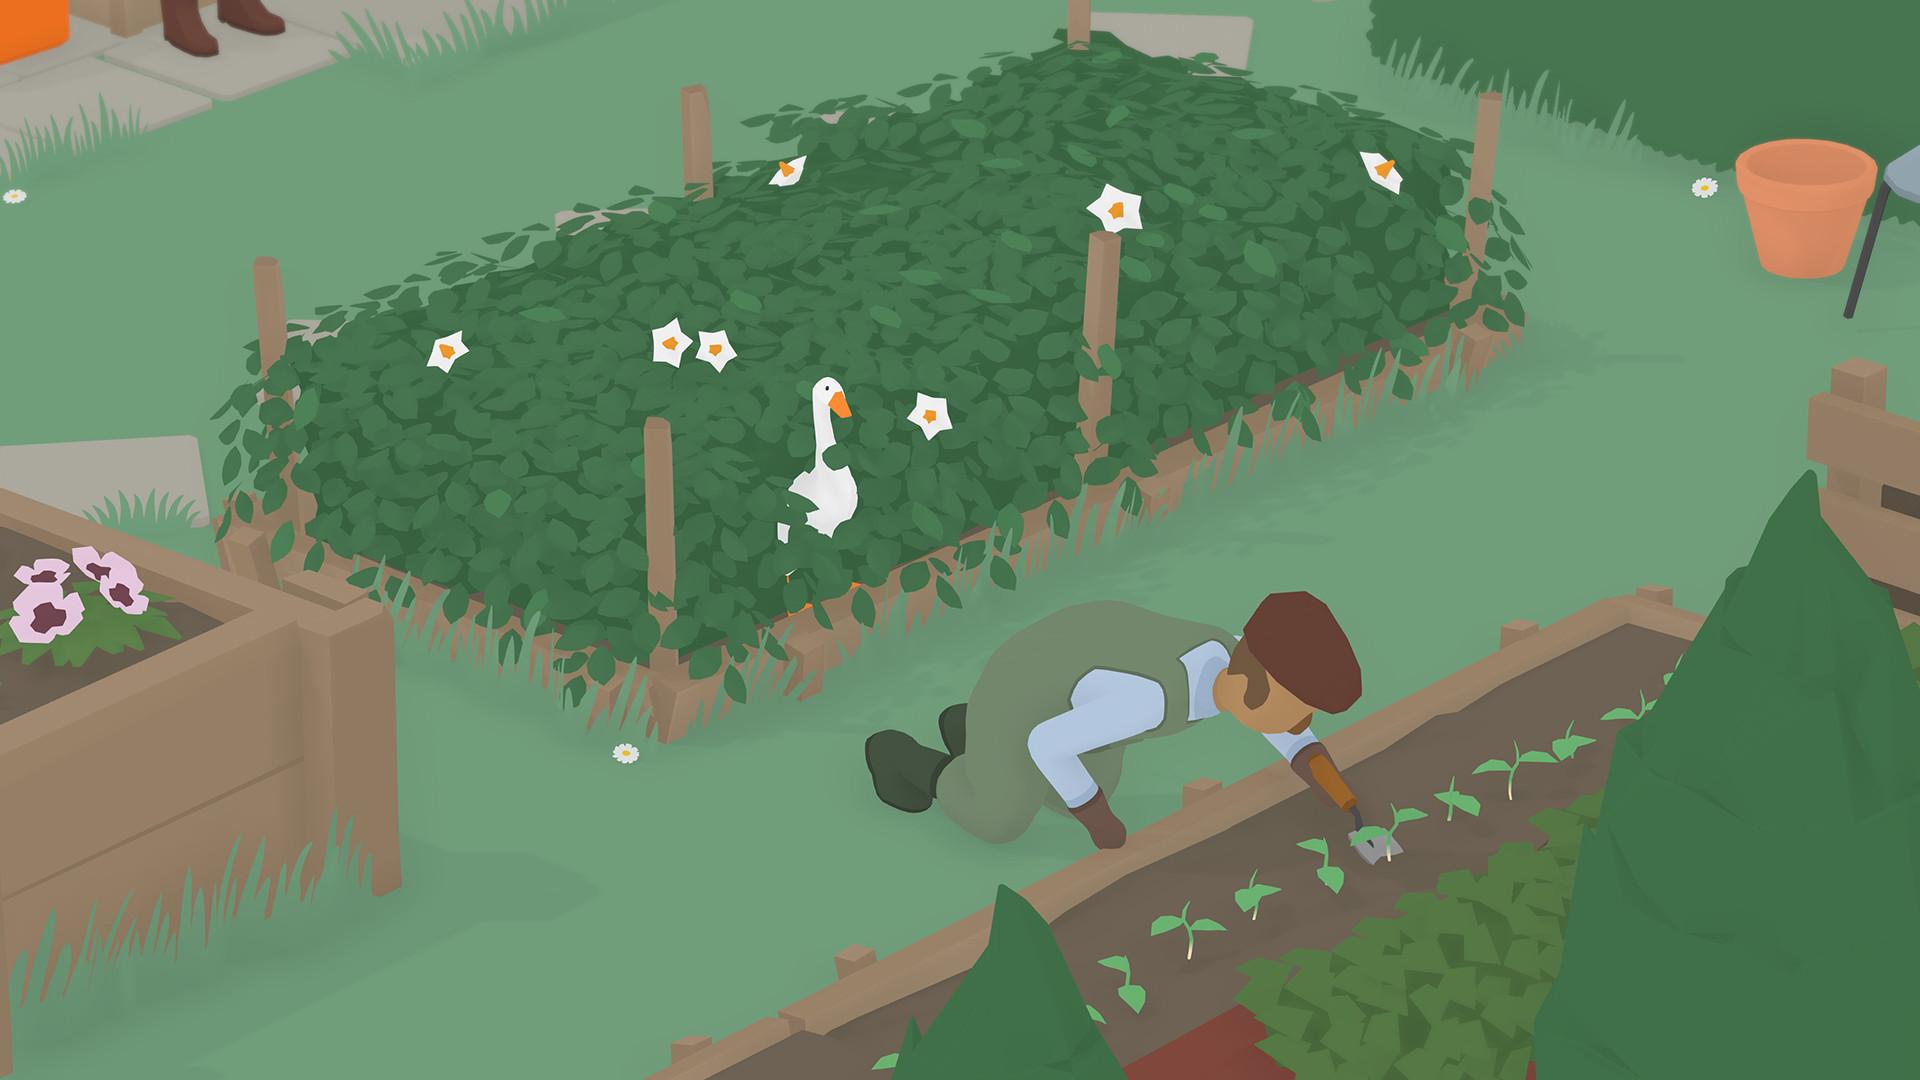 Untitled Goose Game is coming to Nintendo Switch in early 2019